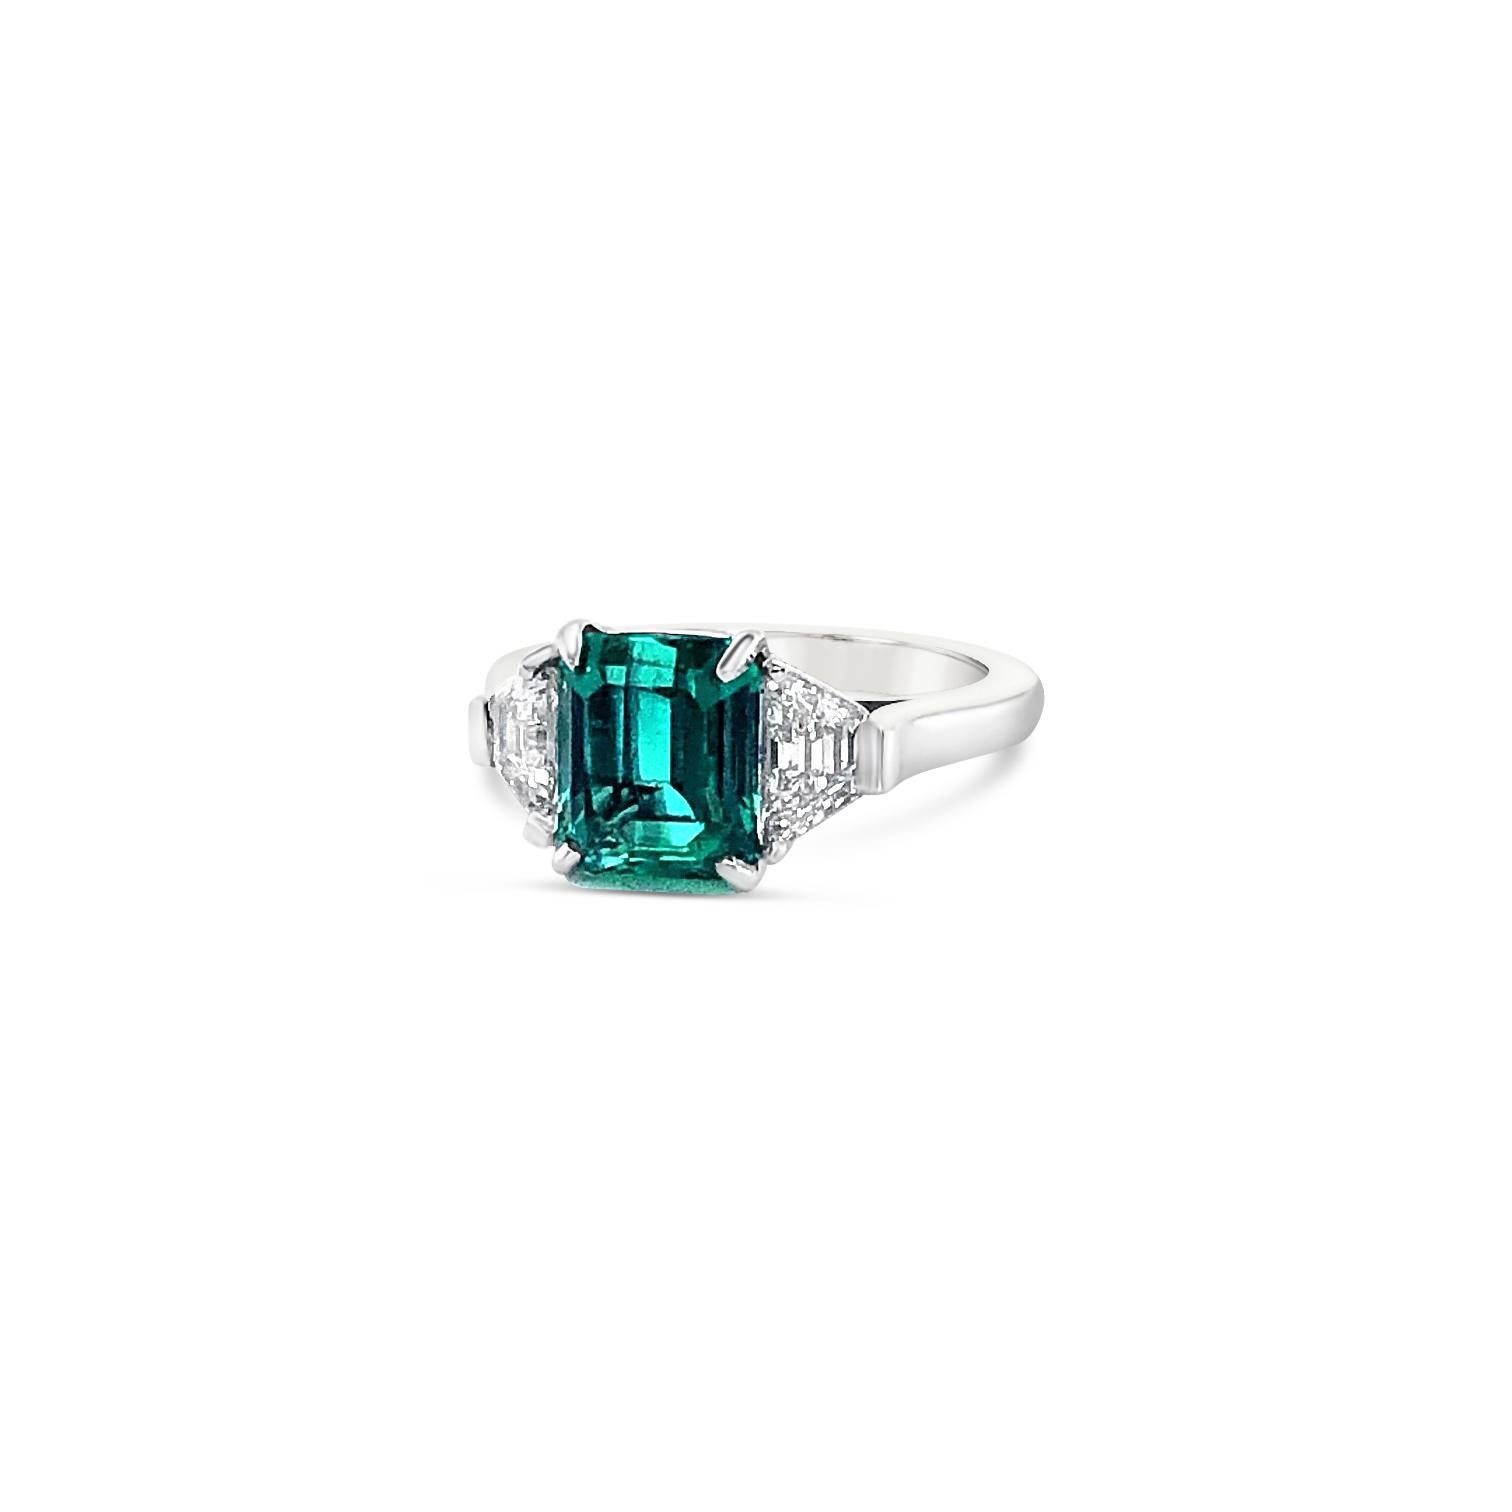 2.72 Carat Emerald and 0.83 Carat 'total weight' Trapeze cut Diamonds set as a Platinum ring. Diamonds are Color H-I, Clarity SI1-SI2.